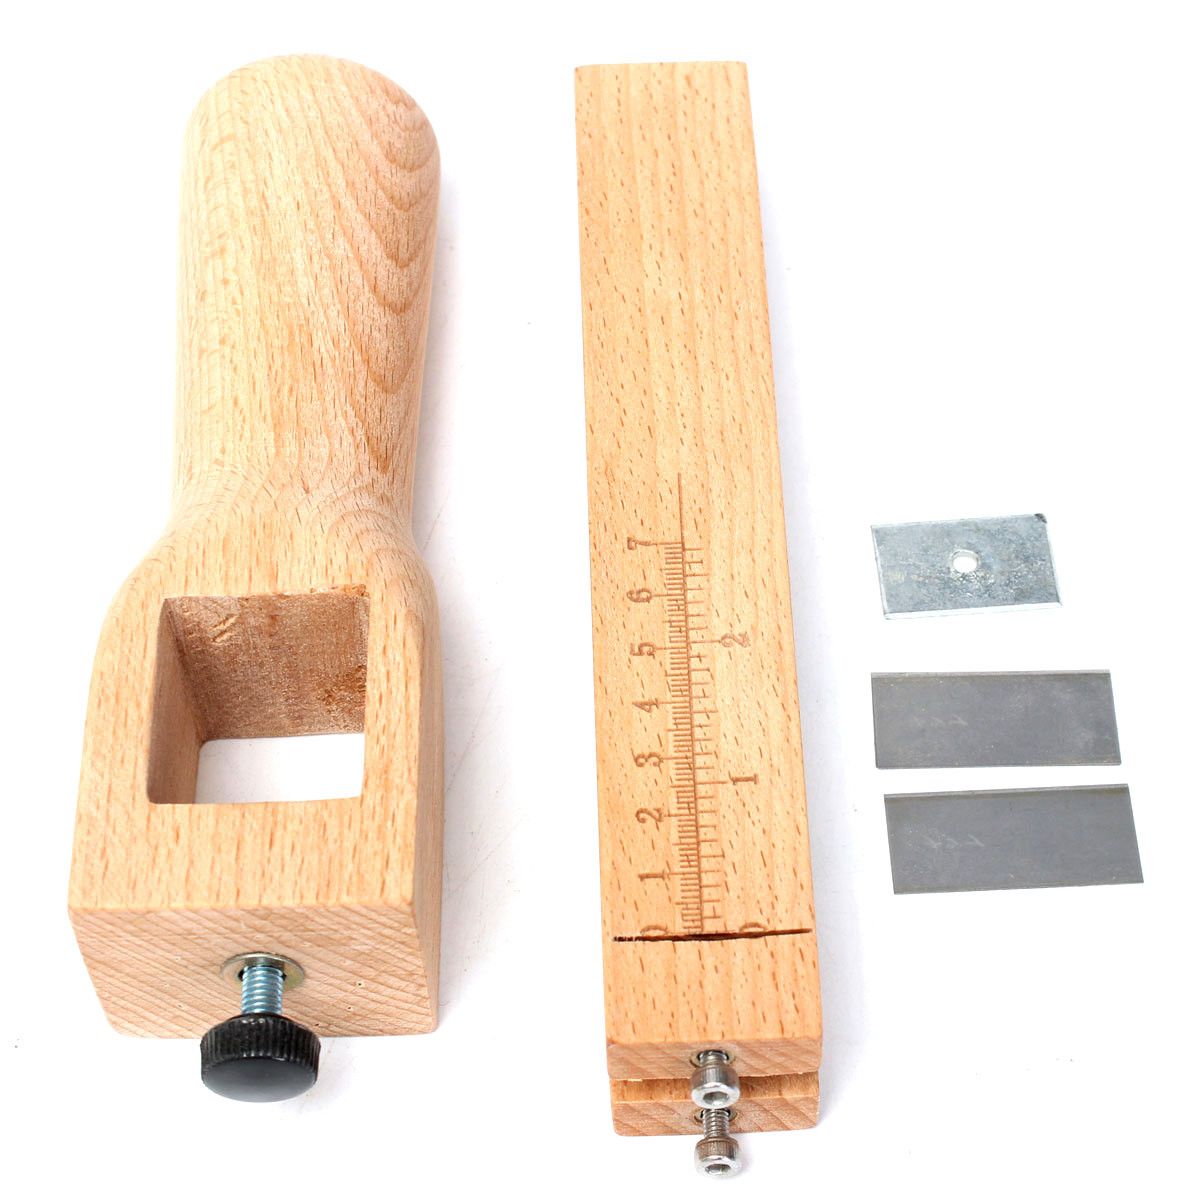 Adjust-Leather-Strip-Strap-Cutter-Craft-Tool-Hand-Cutting-Tool-With-Blade-1035665